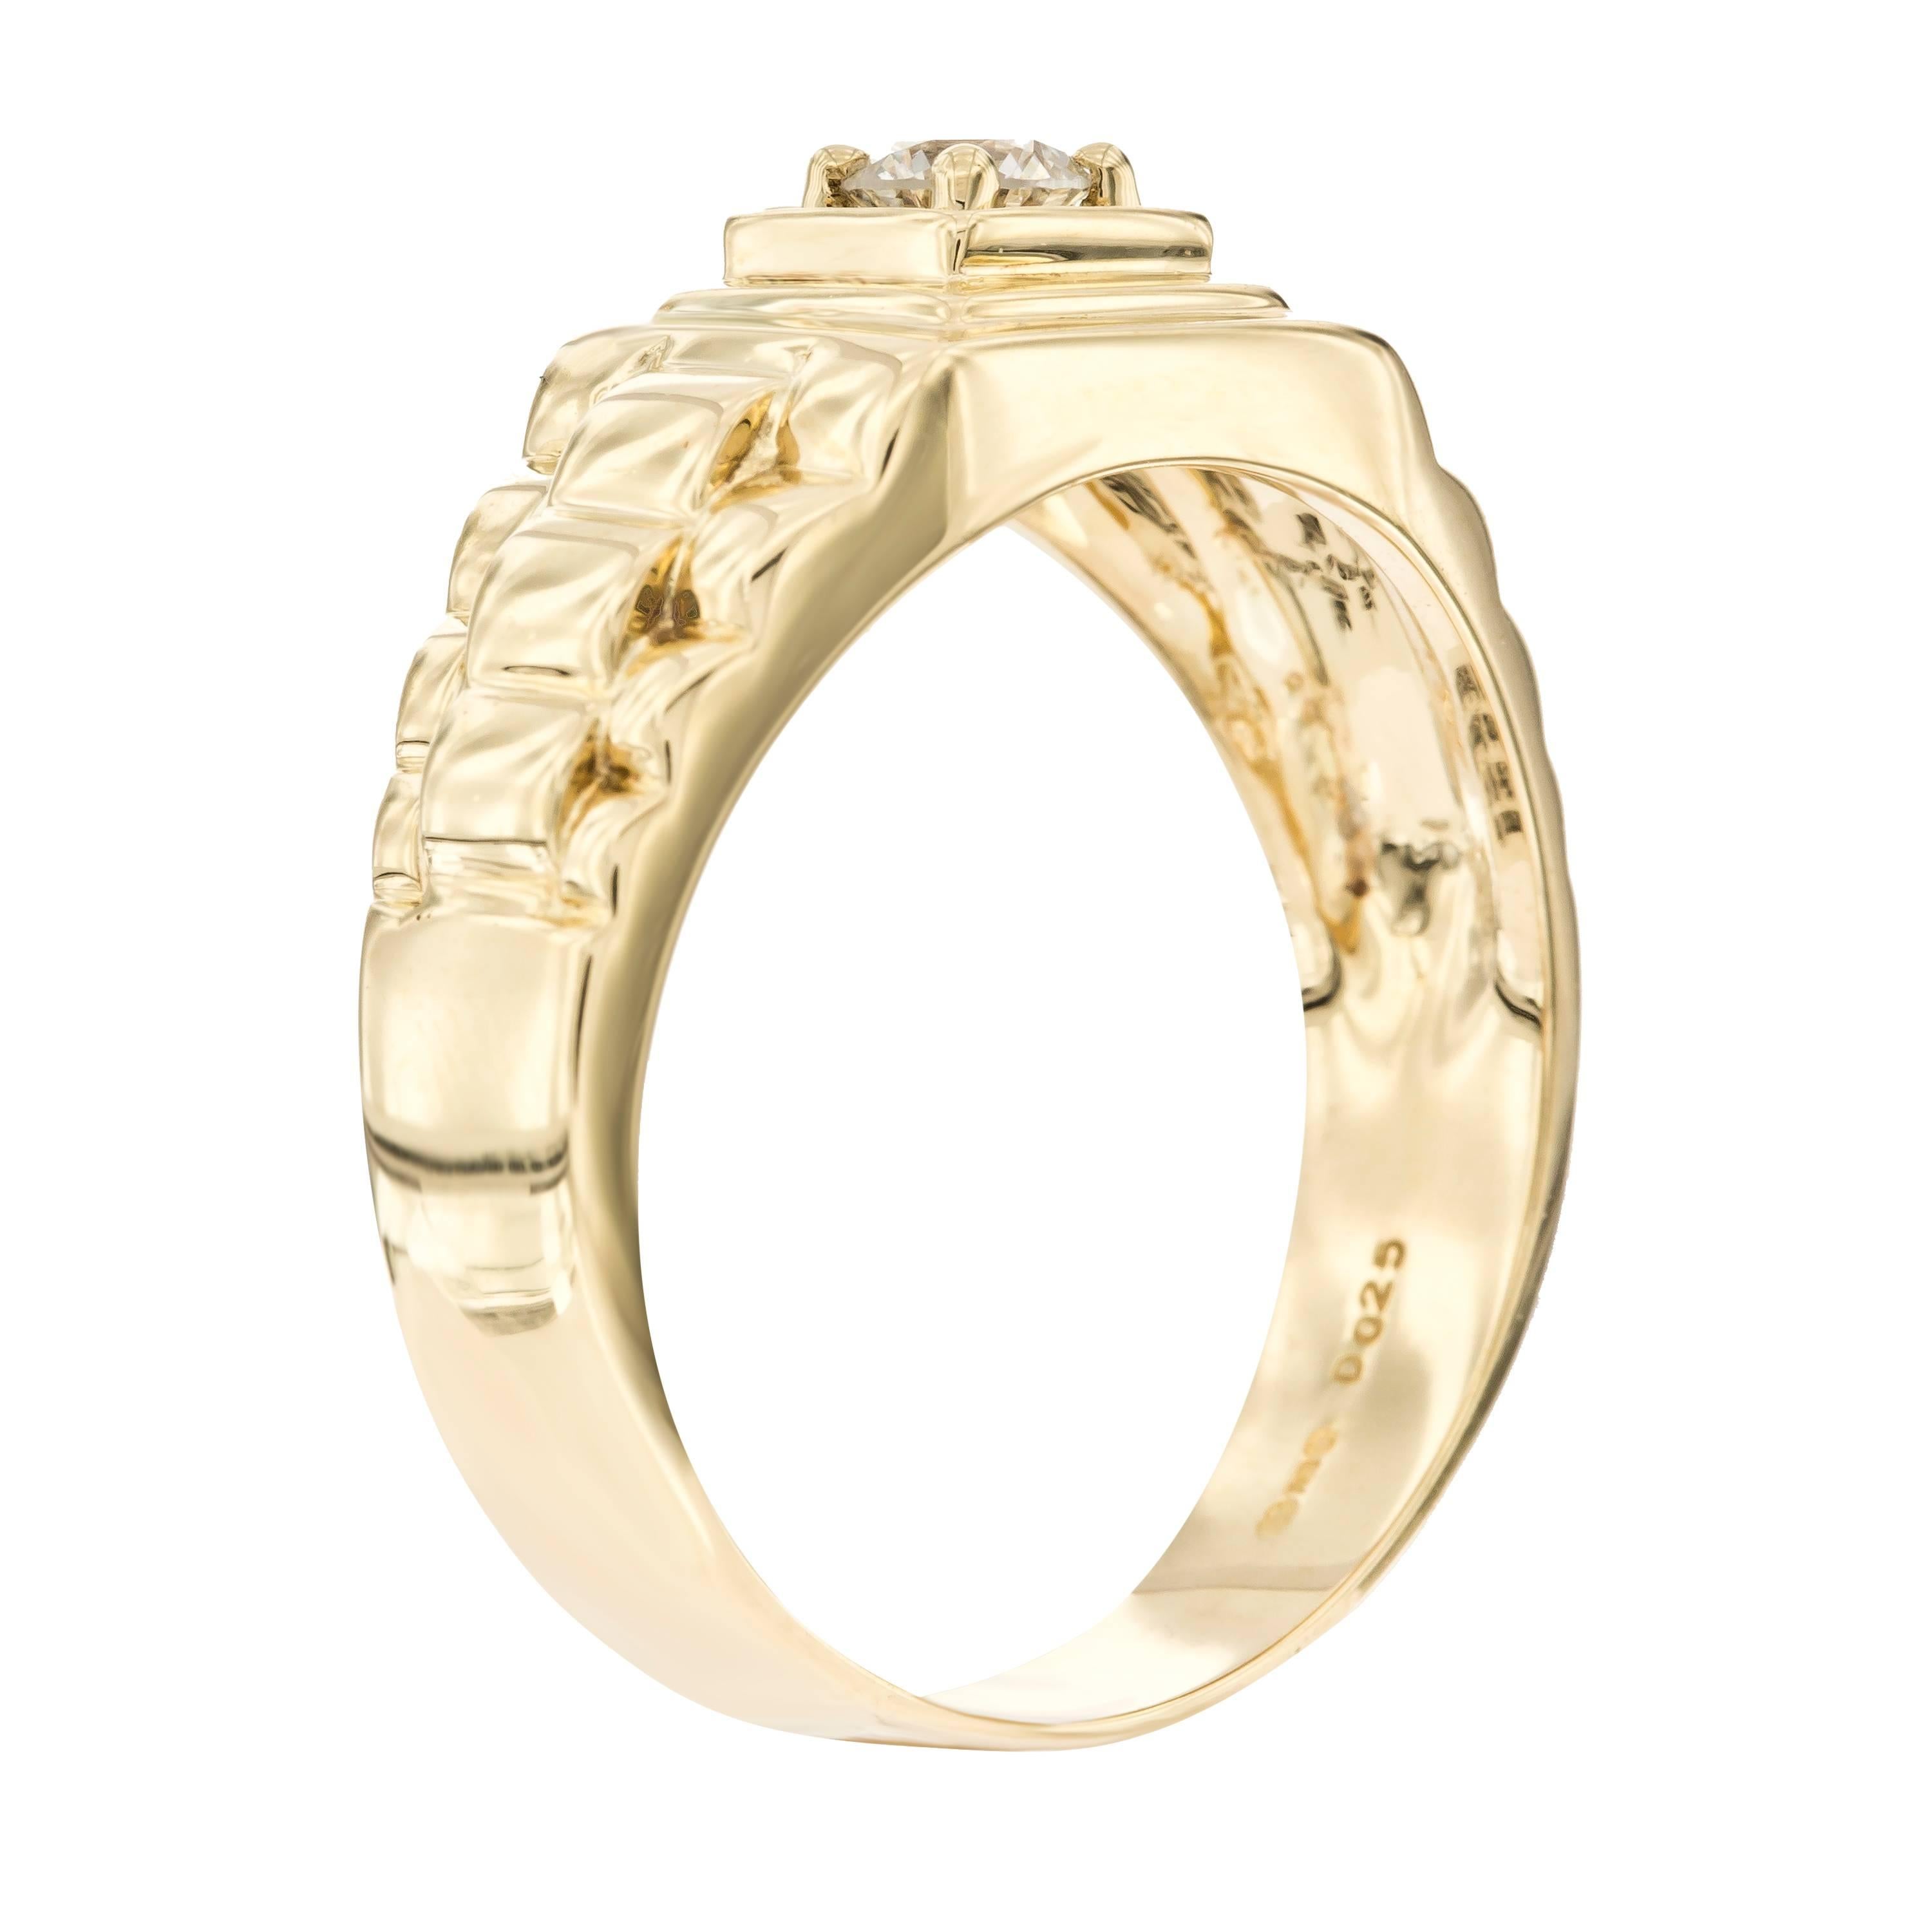 0.25 Round Brilliant White Diamond Men's Signet Style ring is set in 18 Karat Yellow Gold. Size UK - T 1/2, US - 9 1/2, white color H clarity SI1. The shank has 3 bar step design which gives the ring its influential and solid look. This ring is